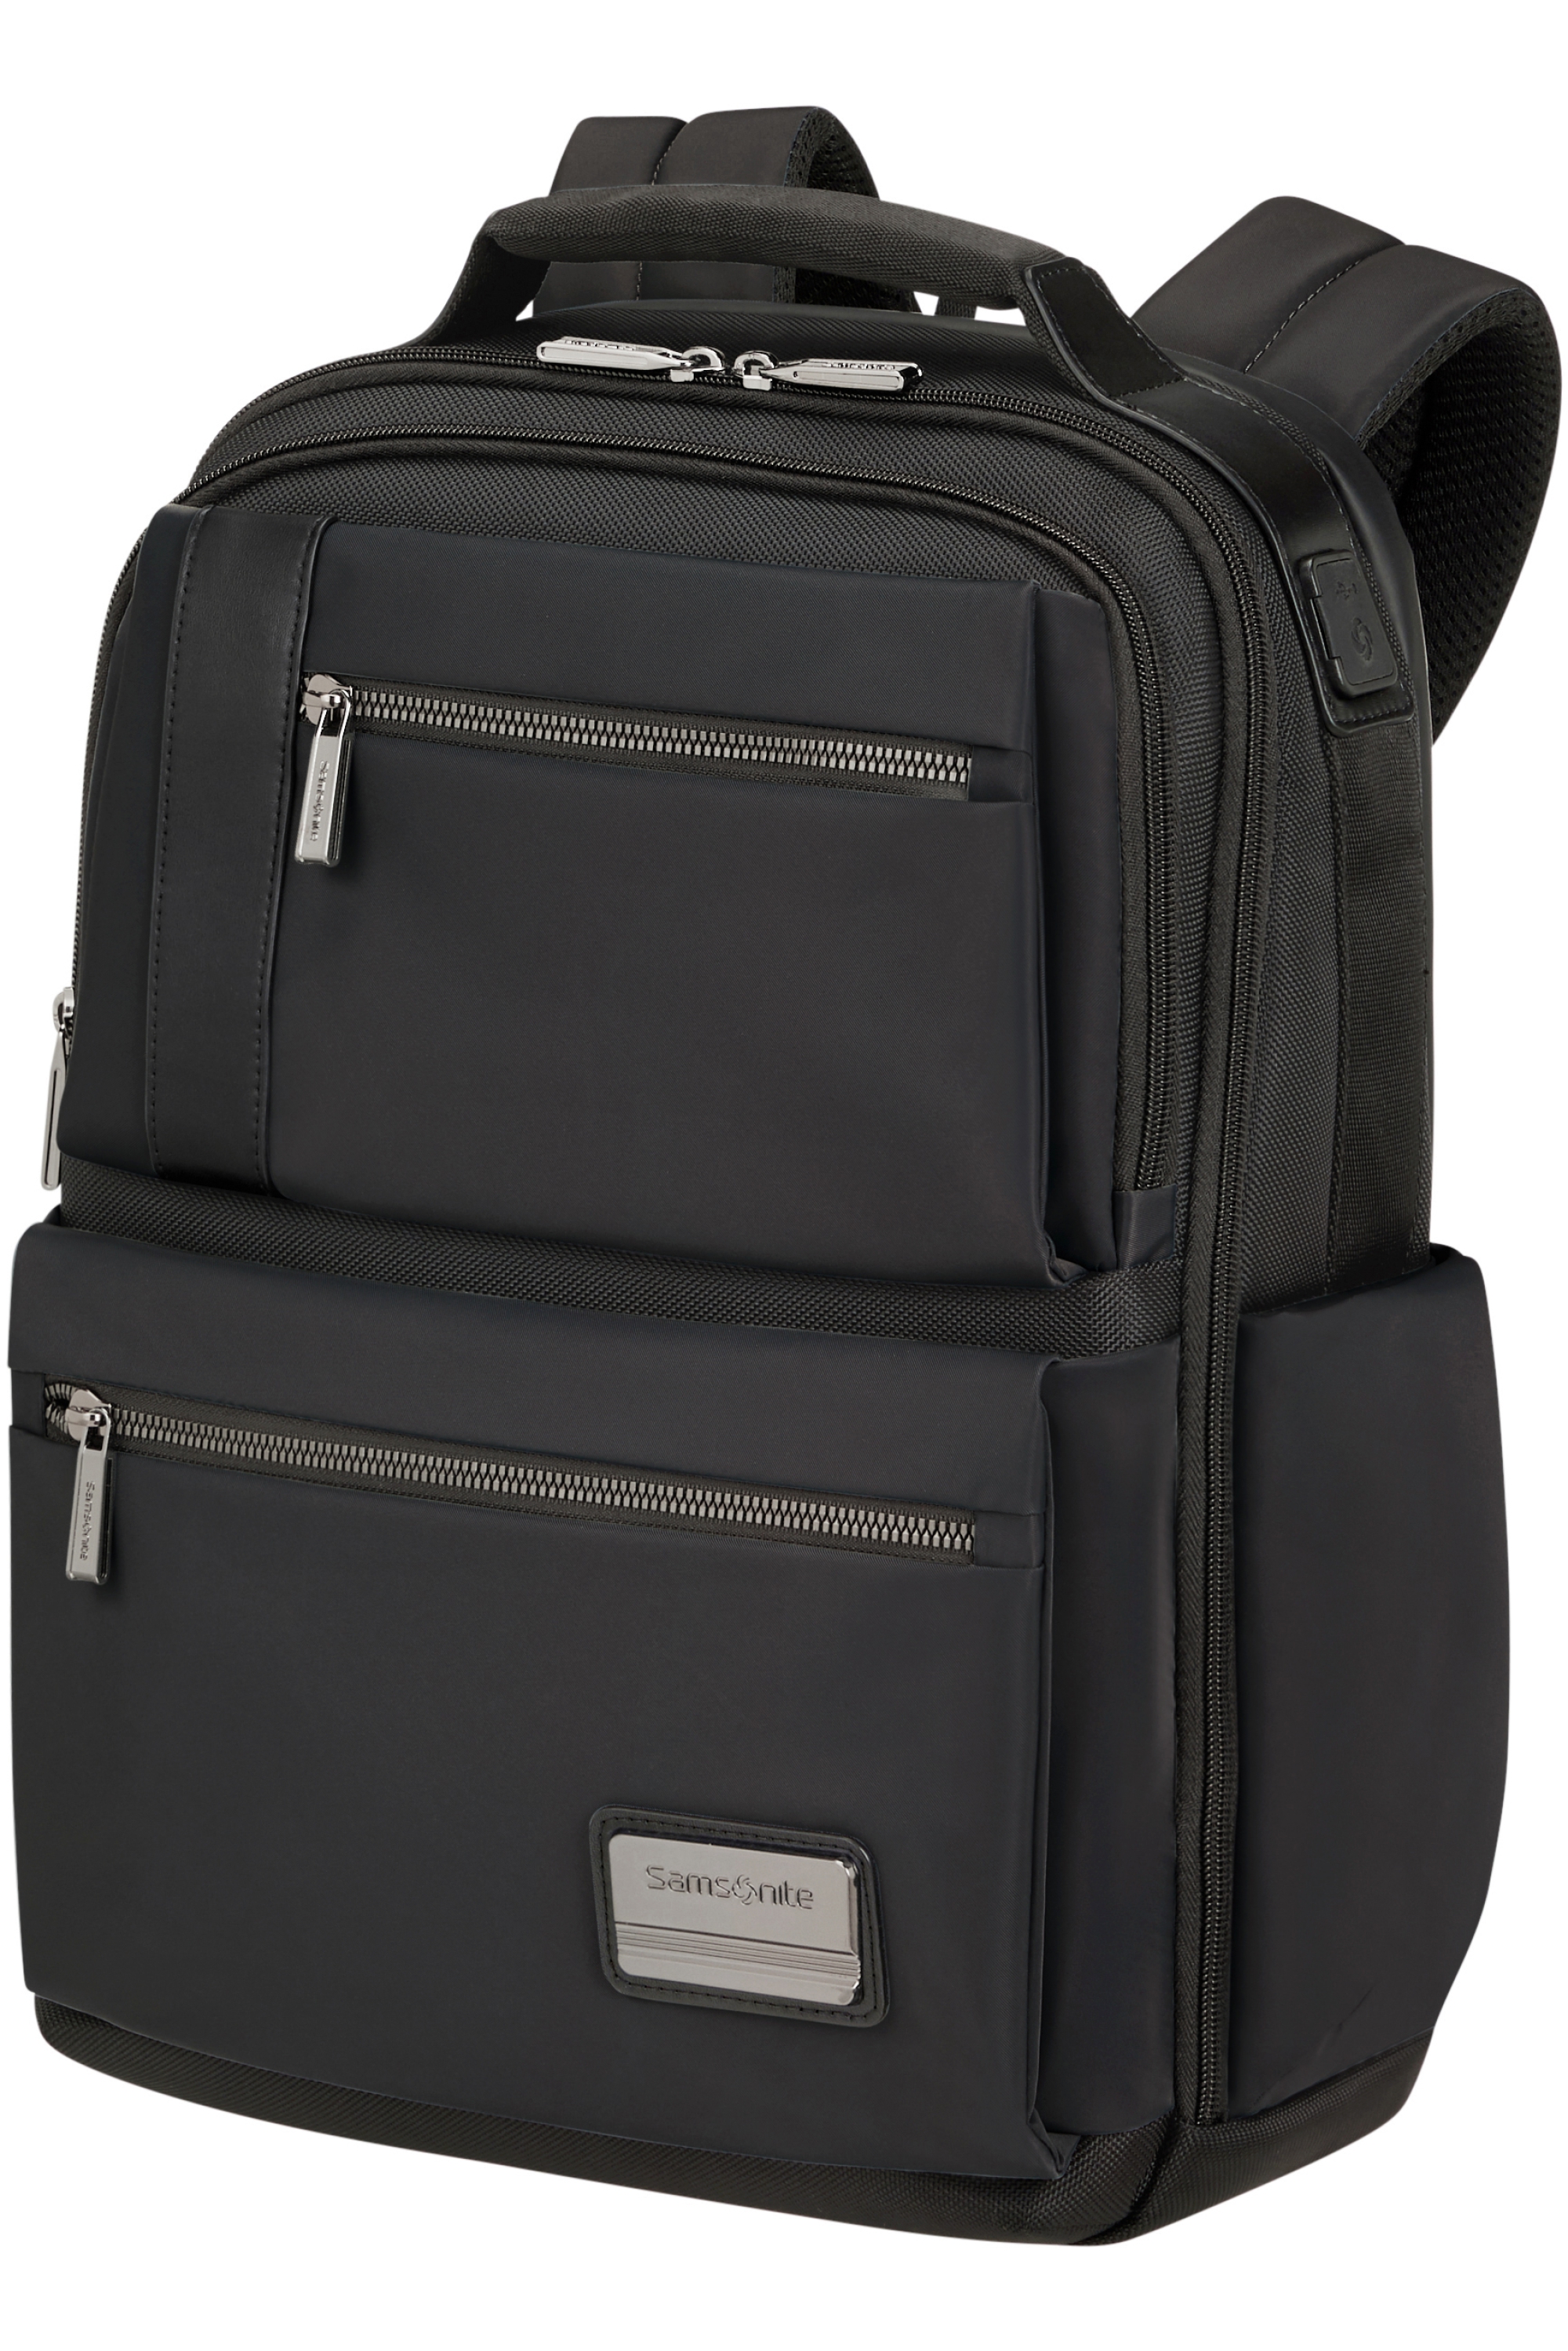 137207-1041-137207_1041_openroad_2-0_laptop_backpack_14-1_front34-b114e8cb-d6a5-4f1b-96ae-acbb00e728af-png